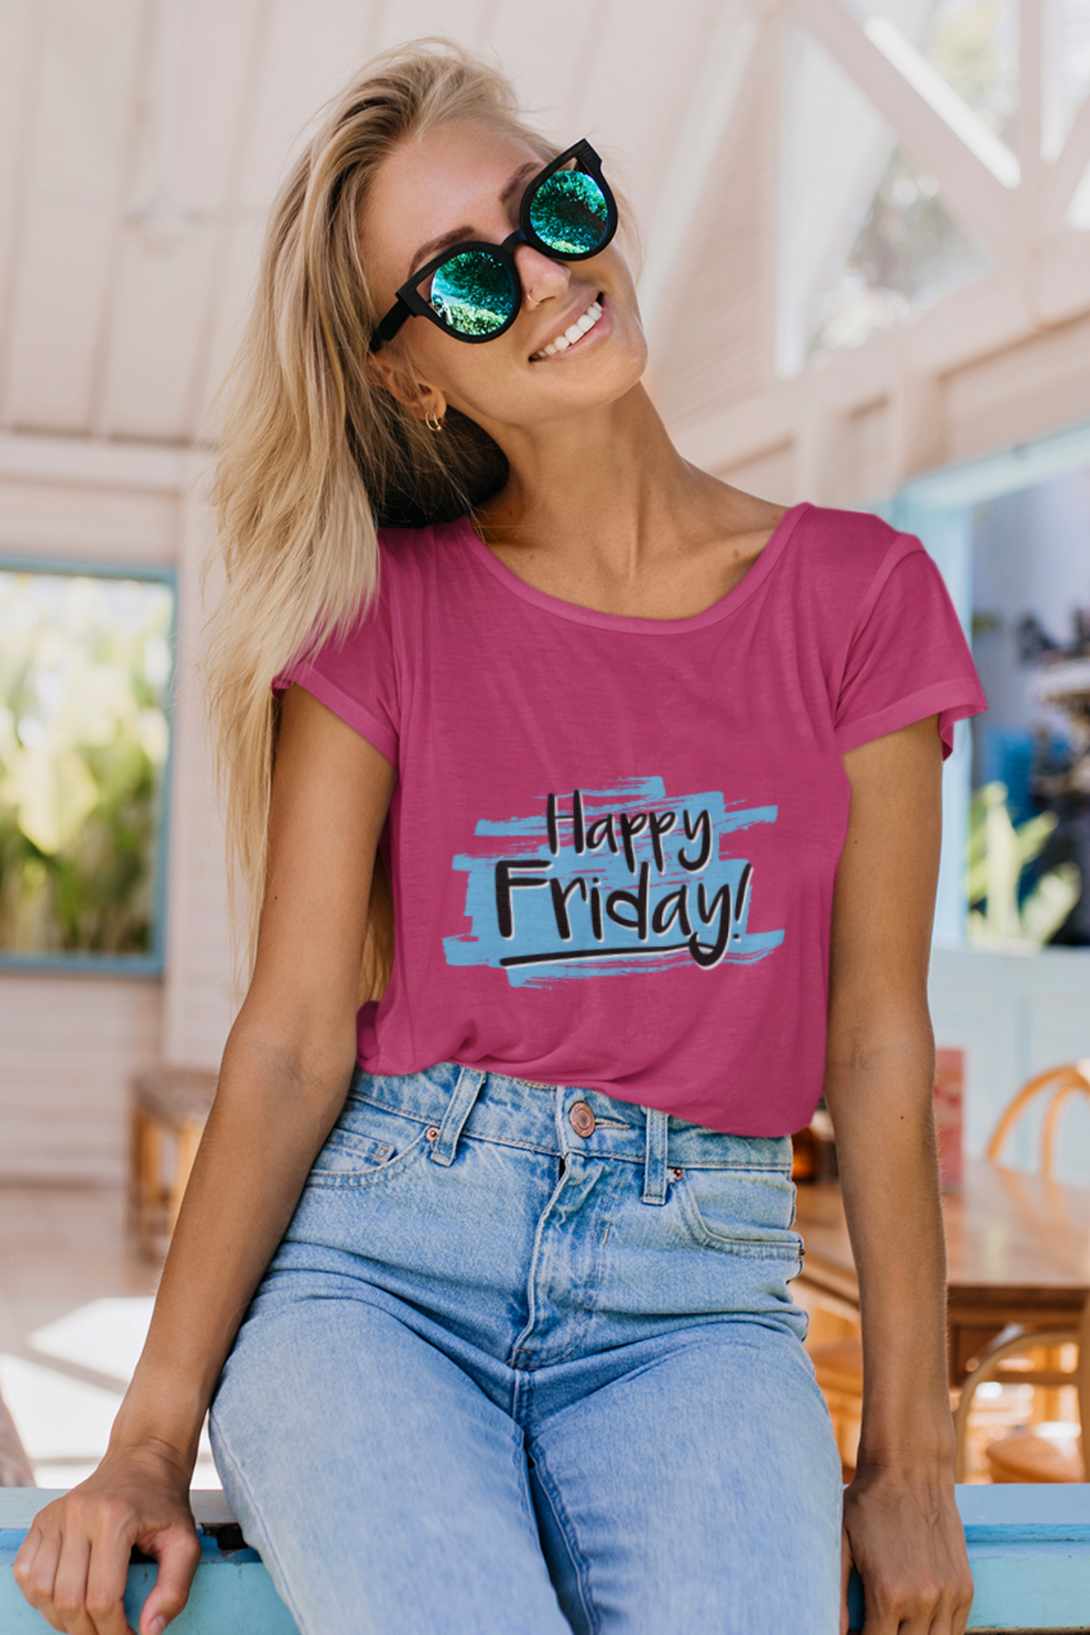 Happy Friday Printed Scoop Neck T-Shirt For Women - WowWaves - 4